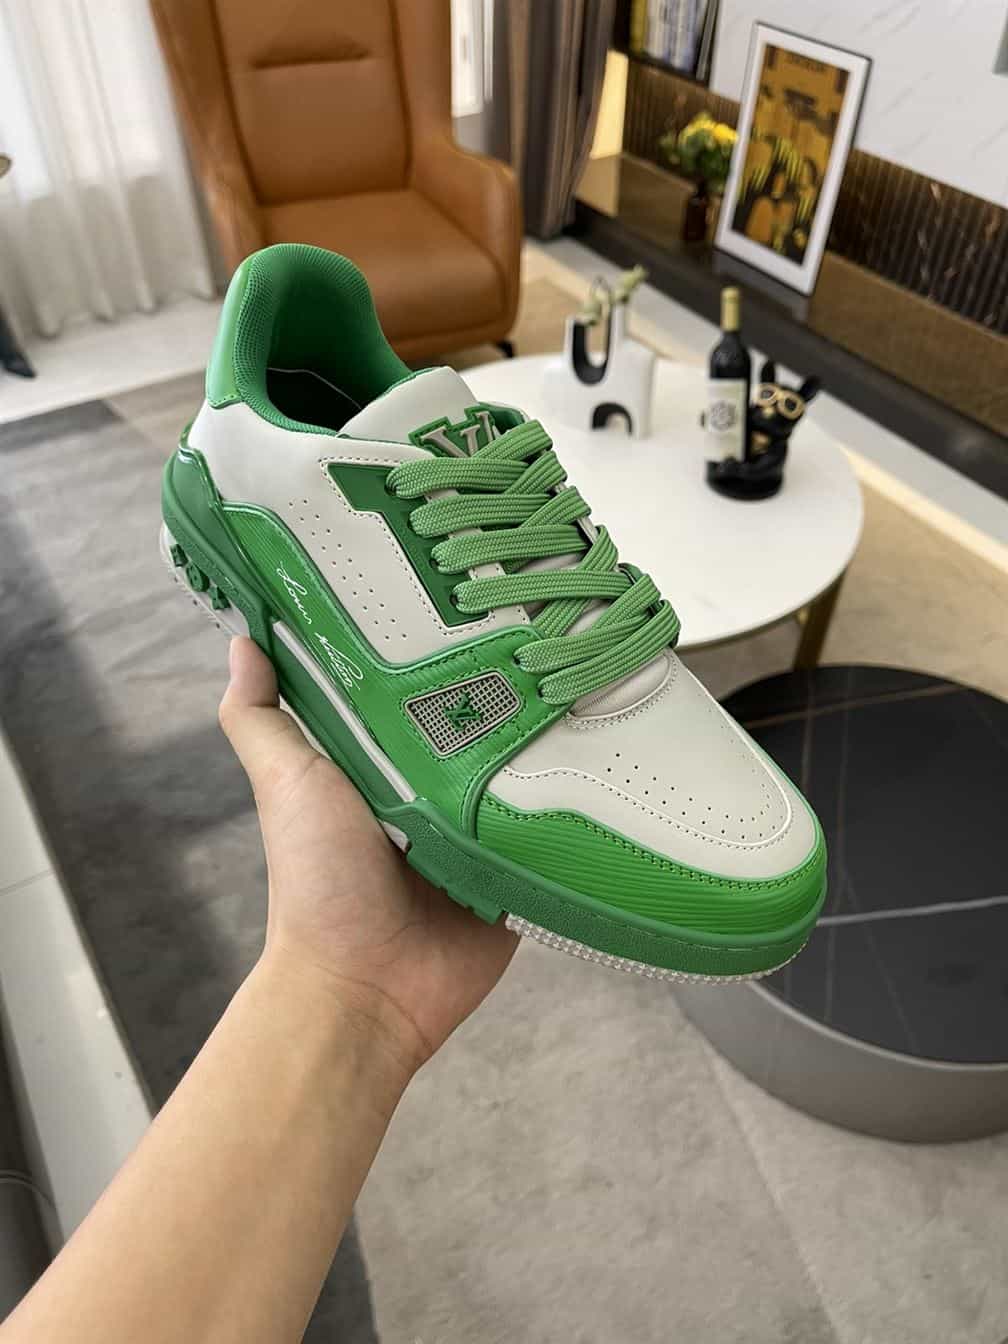 Replica Louis Vuitton LV Trainer Sneakers In Green/White Leather